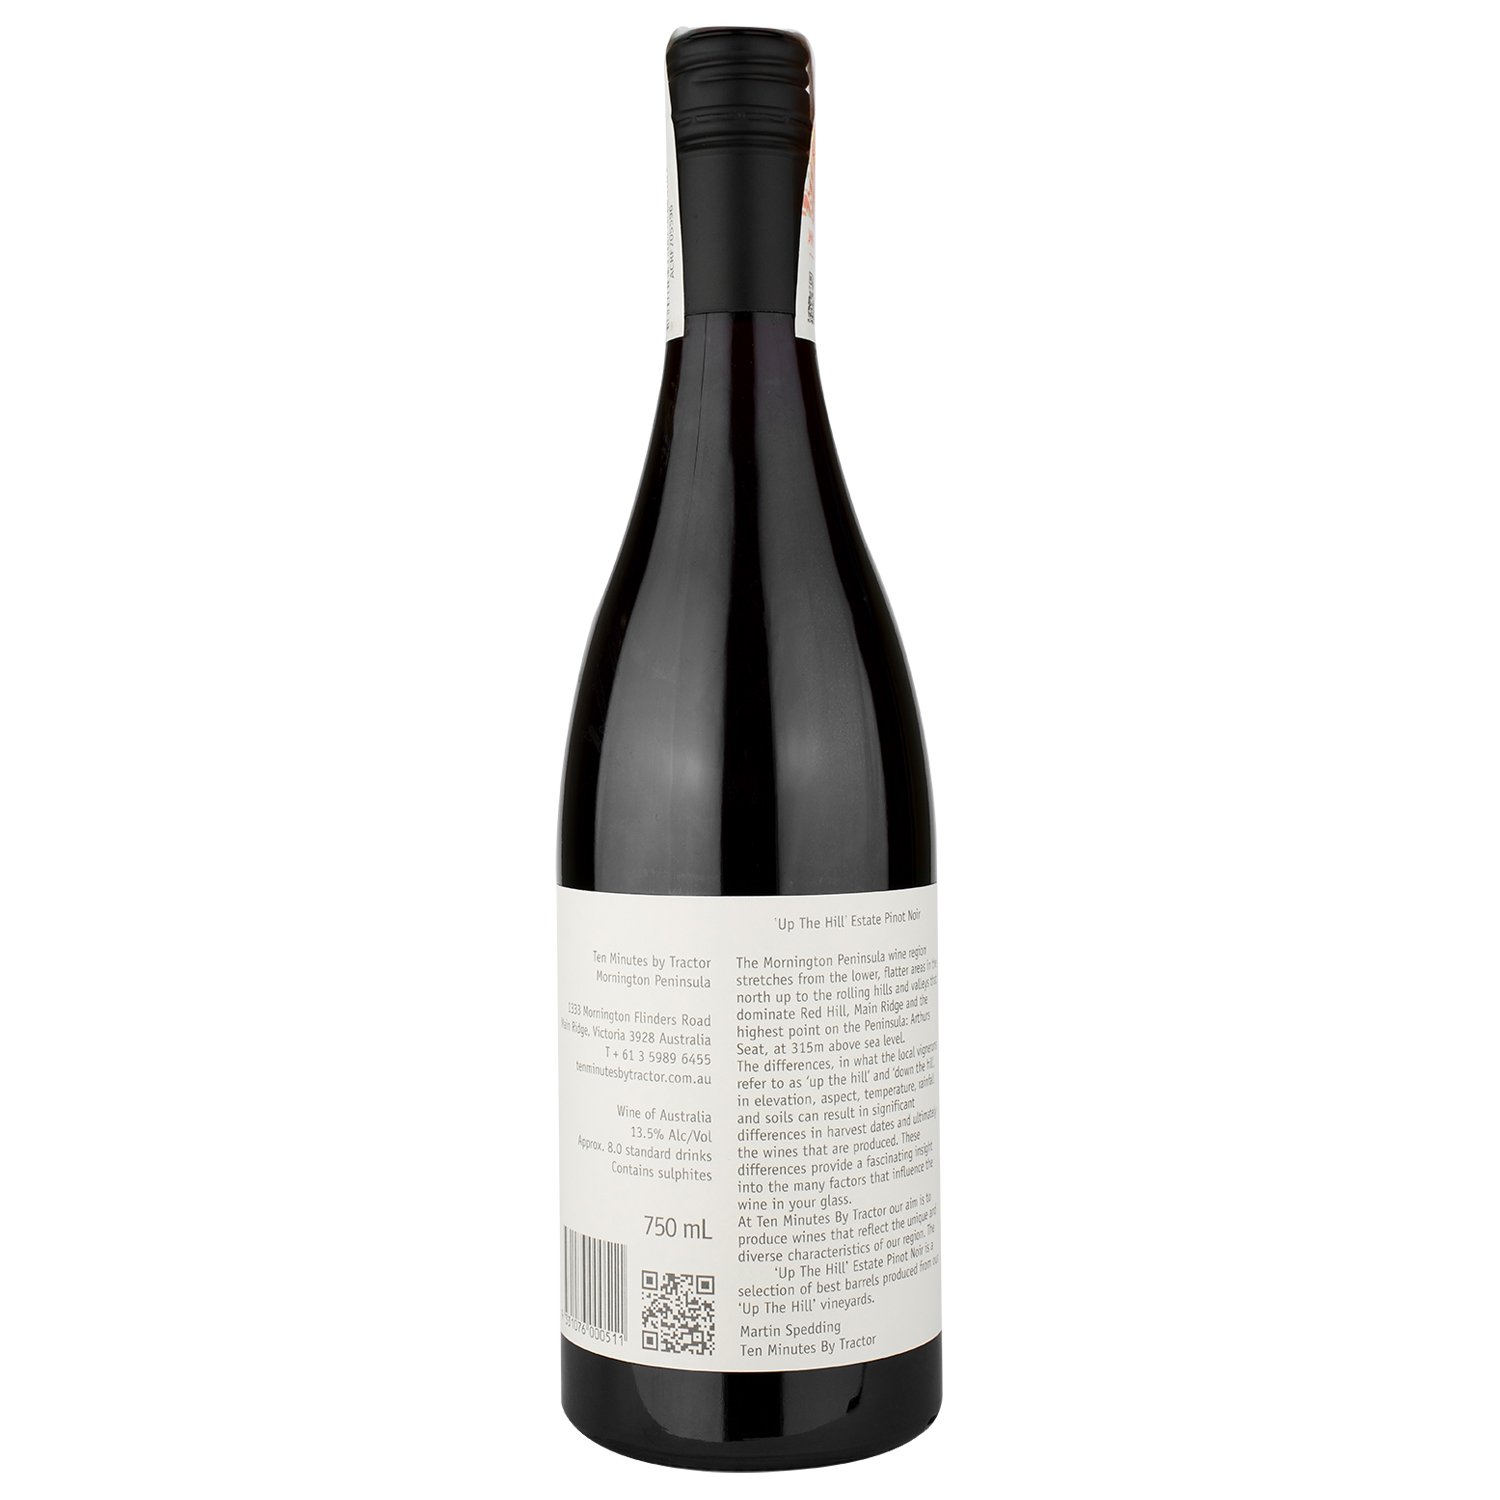 Вино Ten Minutes by Tractor Estate Pinot Noir Up The Hill 2019, красное, сухое, 0,75 л (W2319) - фото 2